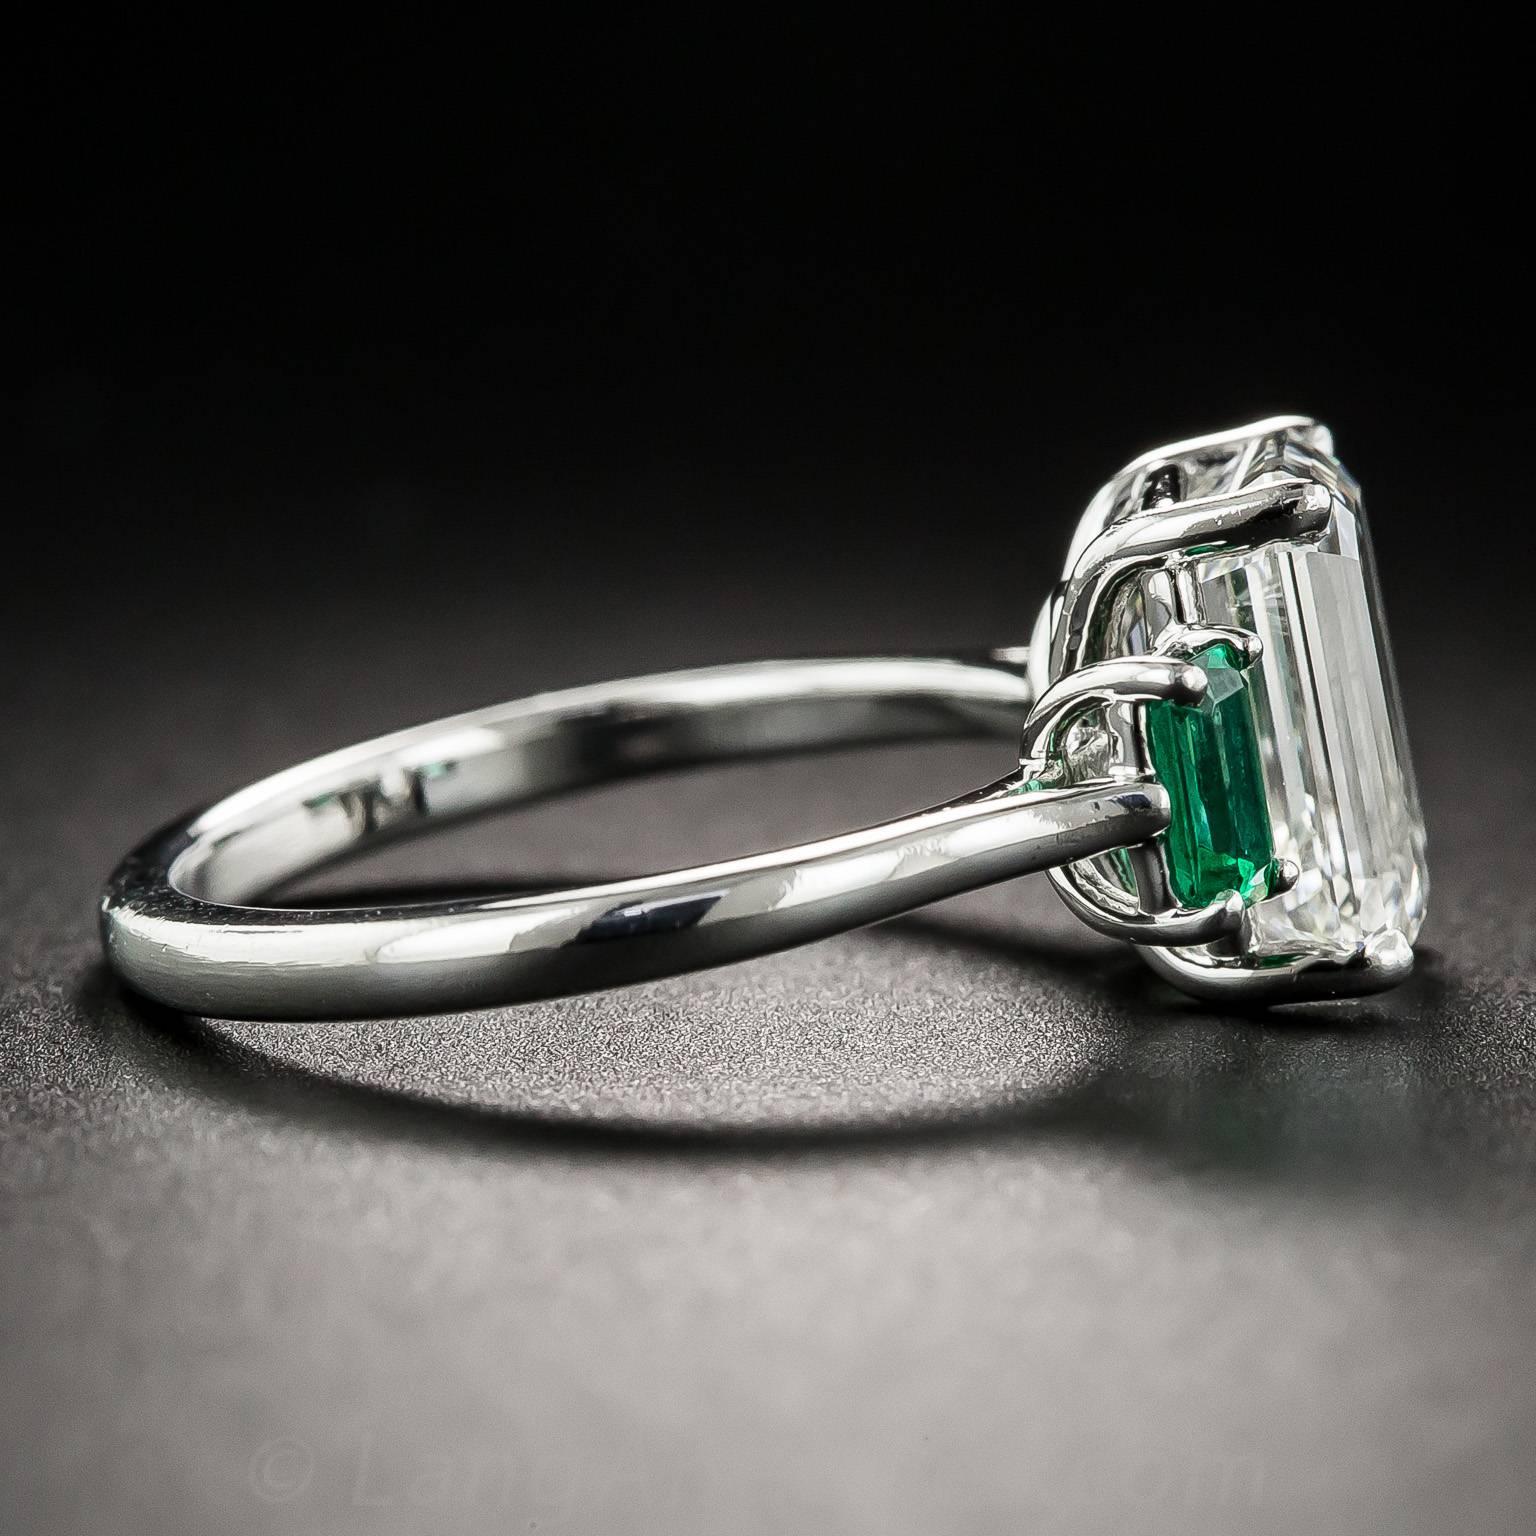 Women's 3.01 Carat GIA Emerald-Cut Diamond and Emerald Ring For Sale